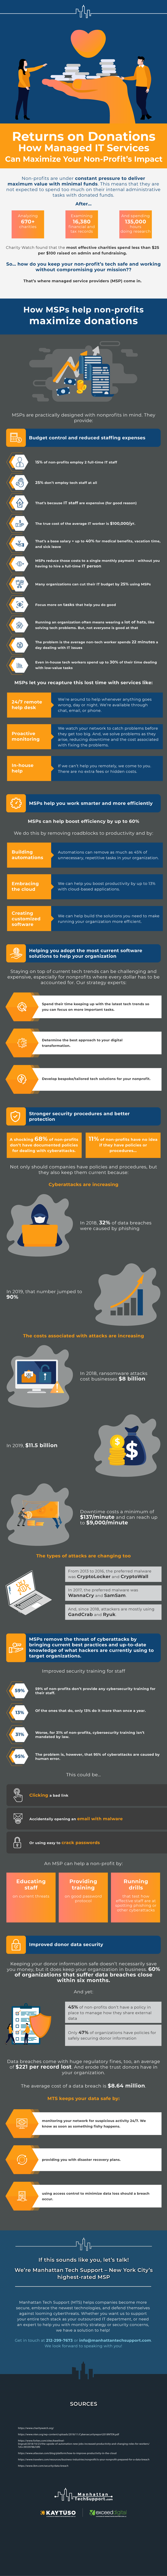 Infographic about how nonprofits can benefit from managed IT services providers